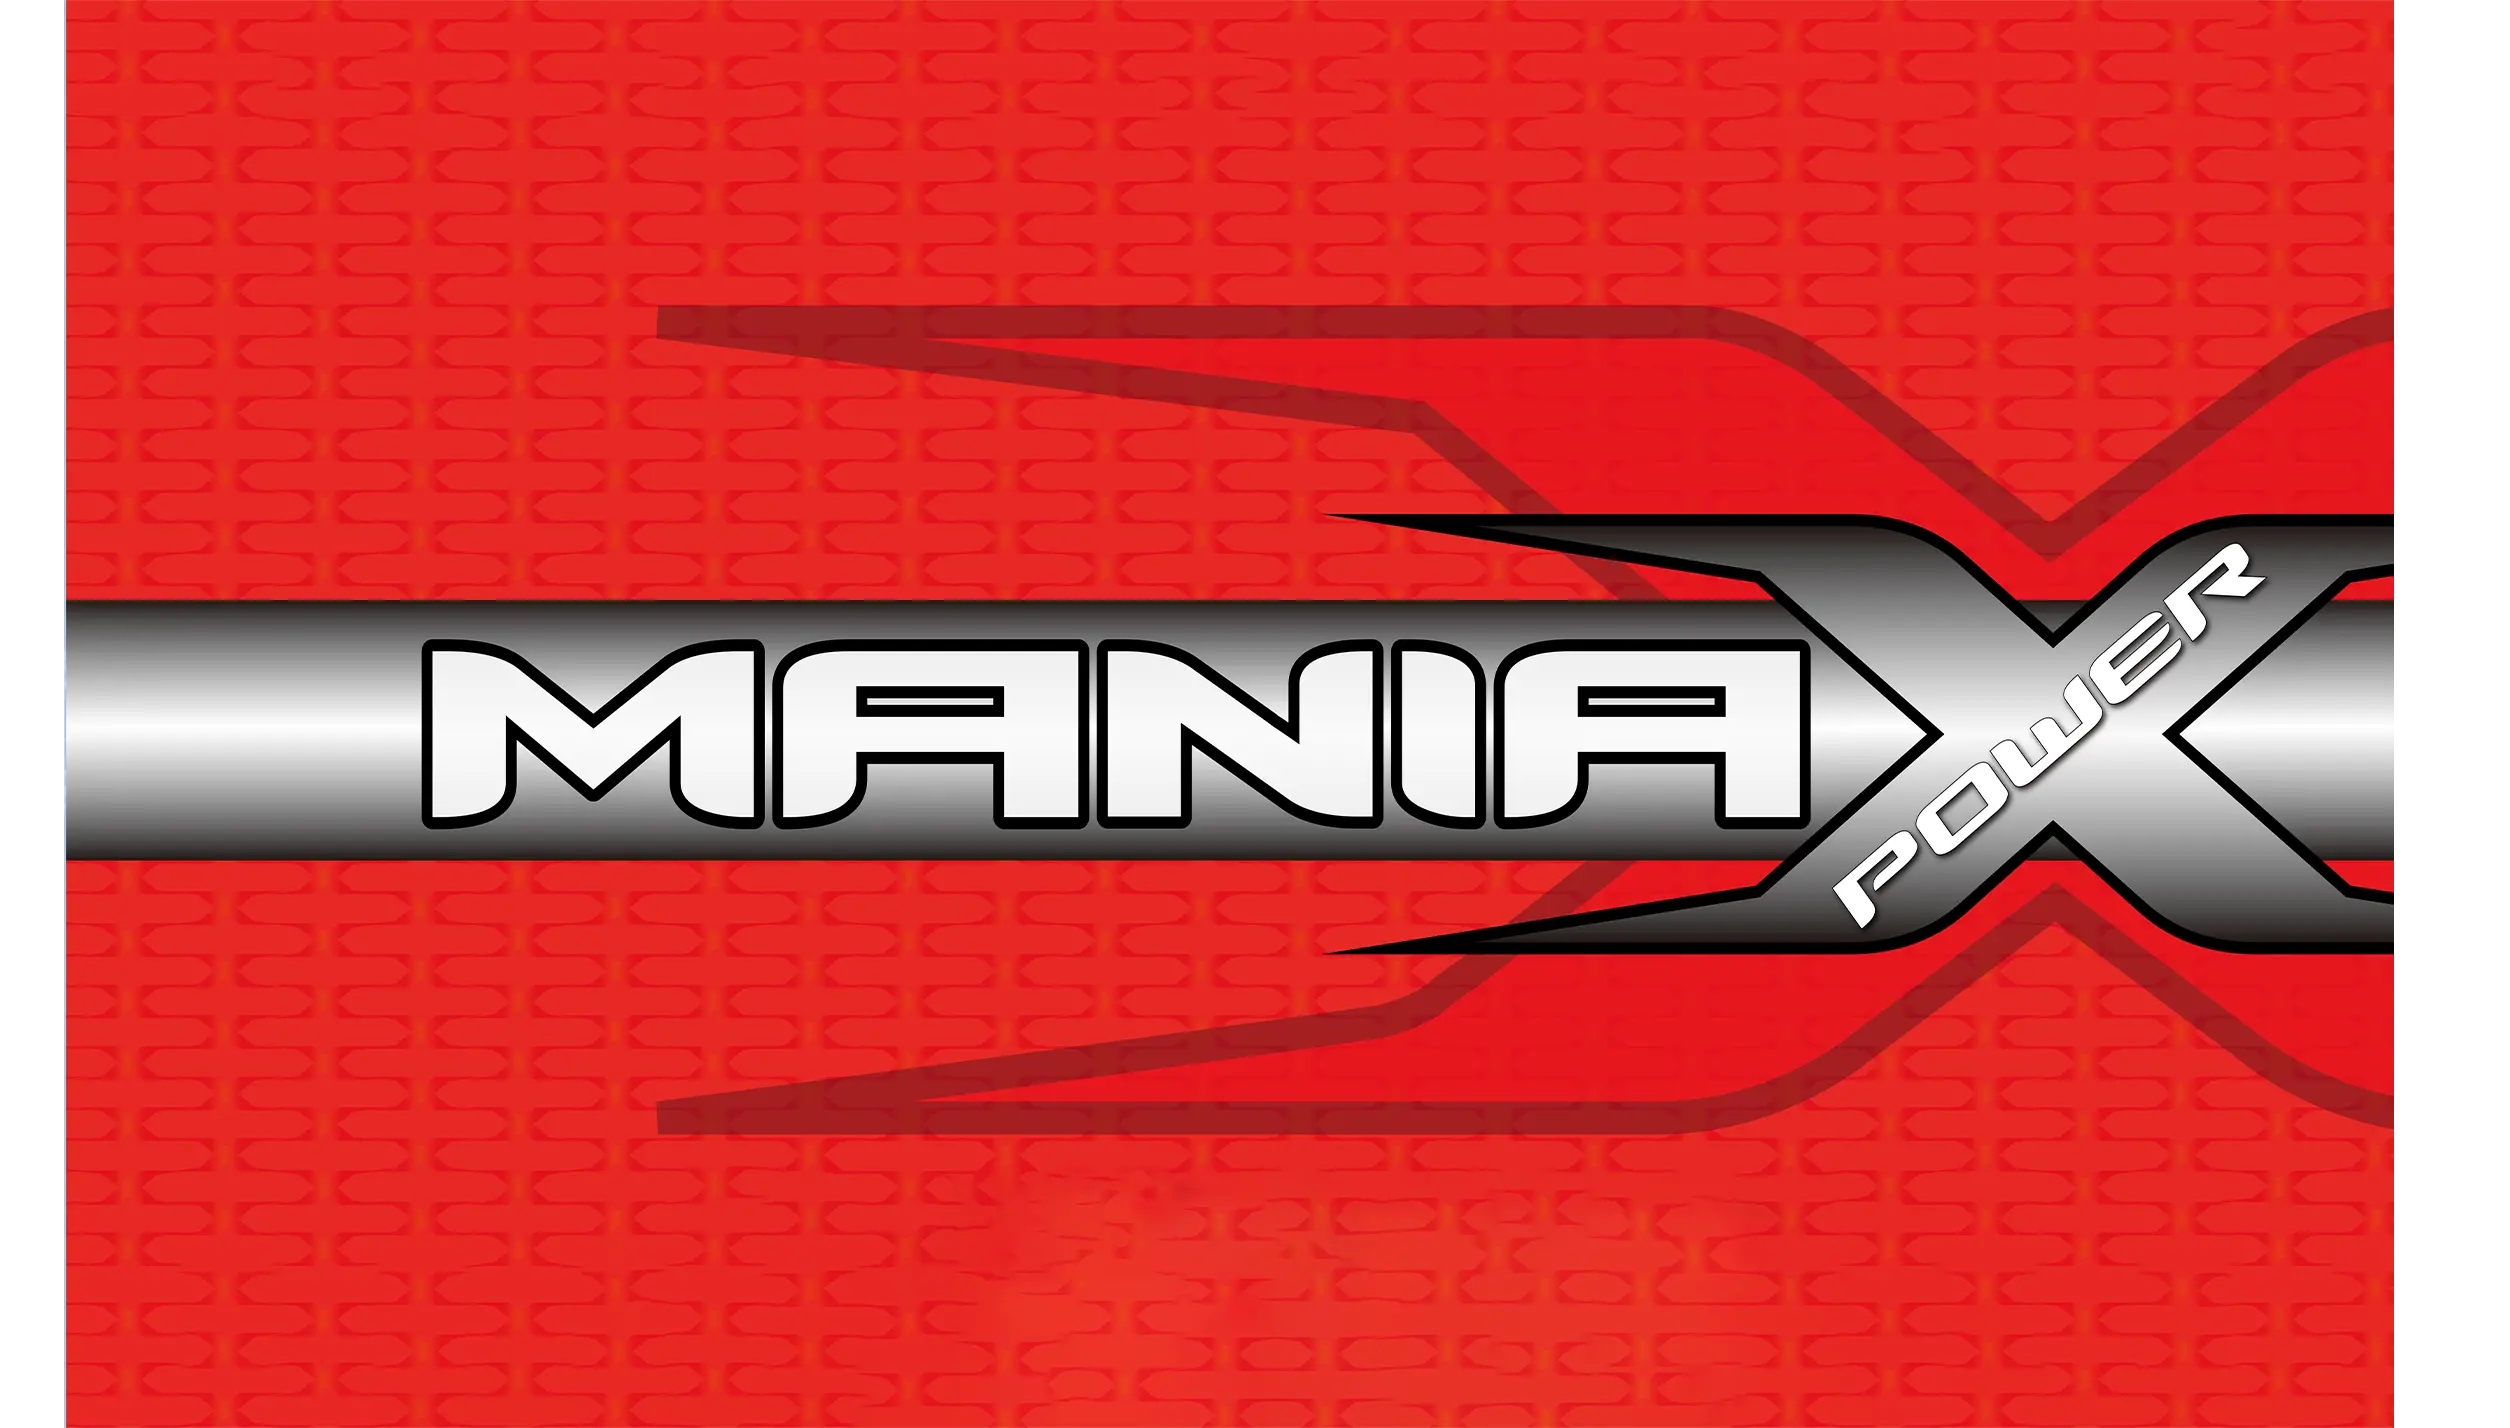 About ManiaX